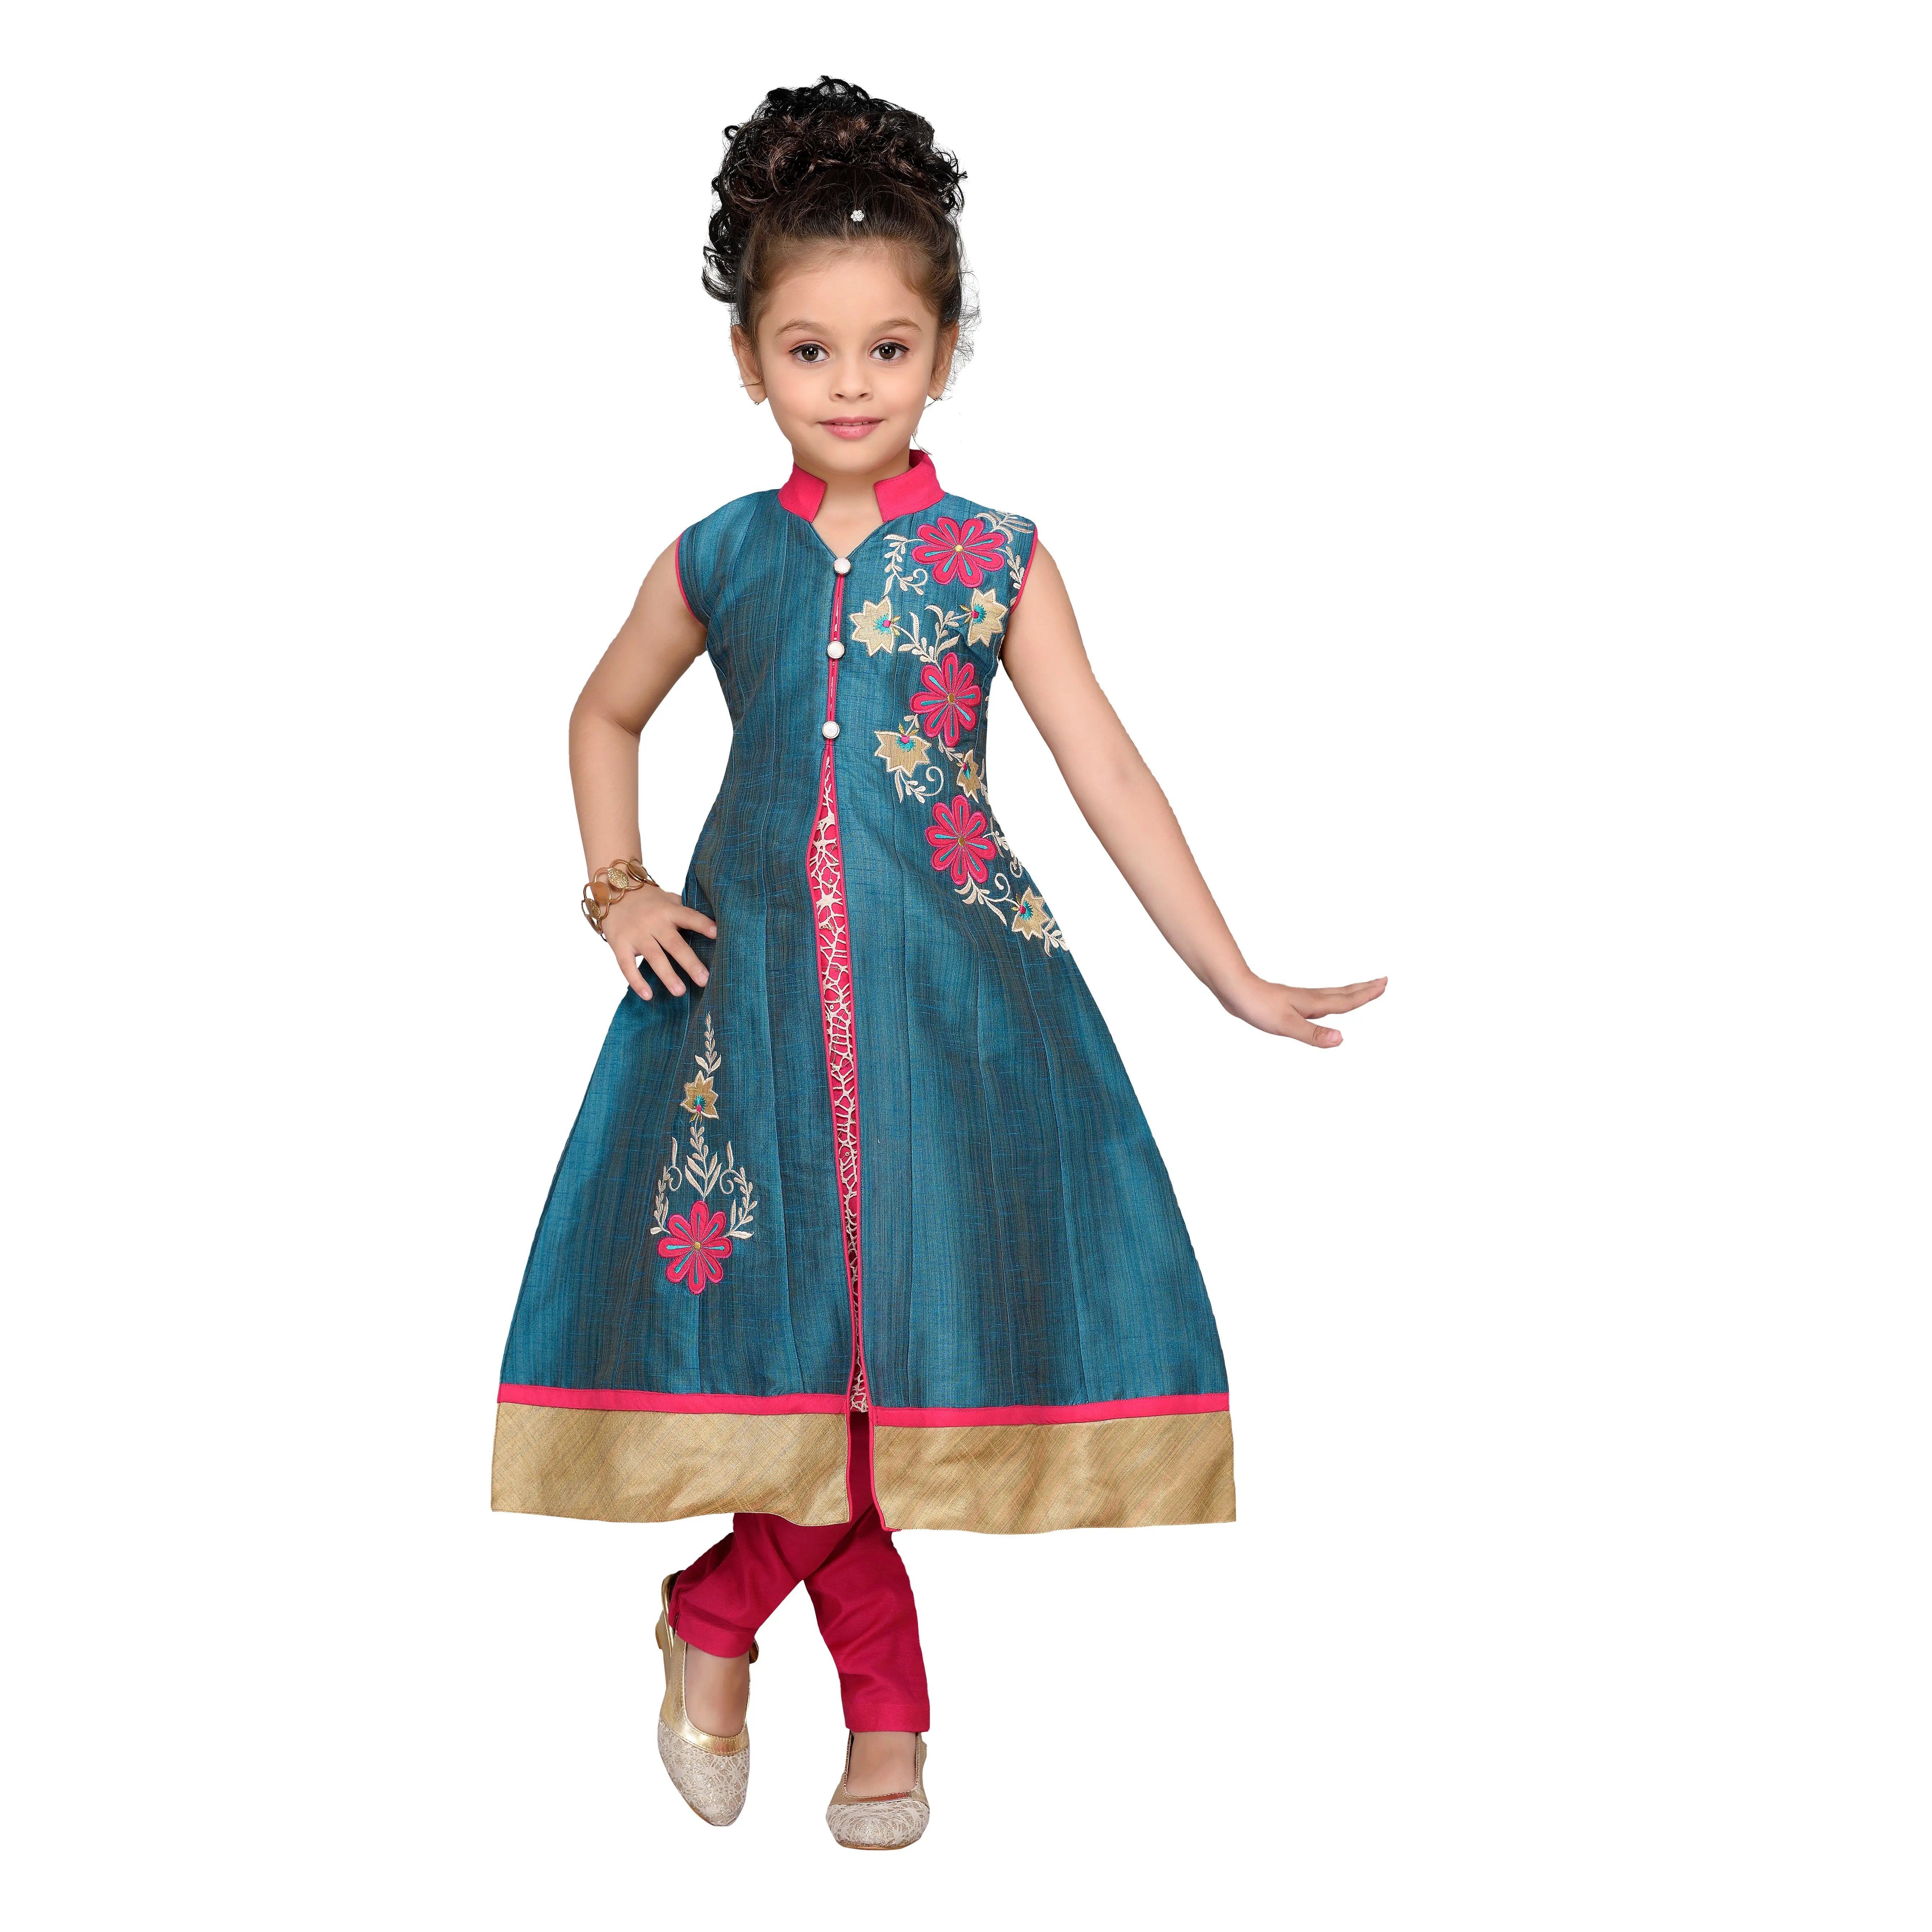 Embroidered various pattern girls dress